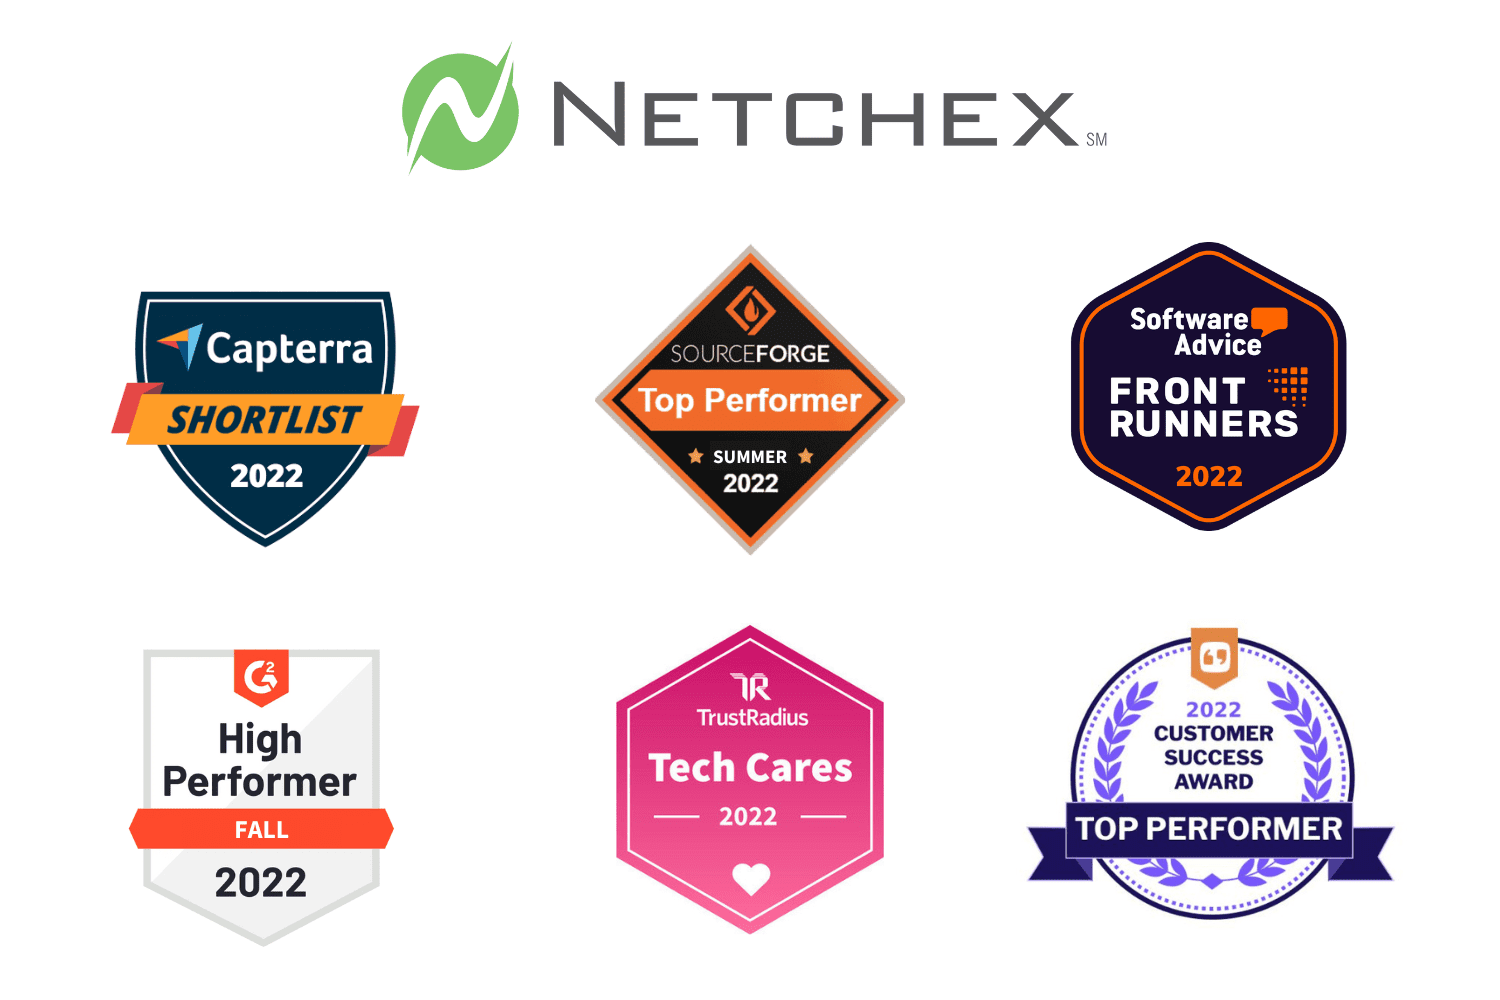 Netchex Again Recognized as a HR Technology & Service Leader